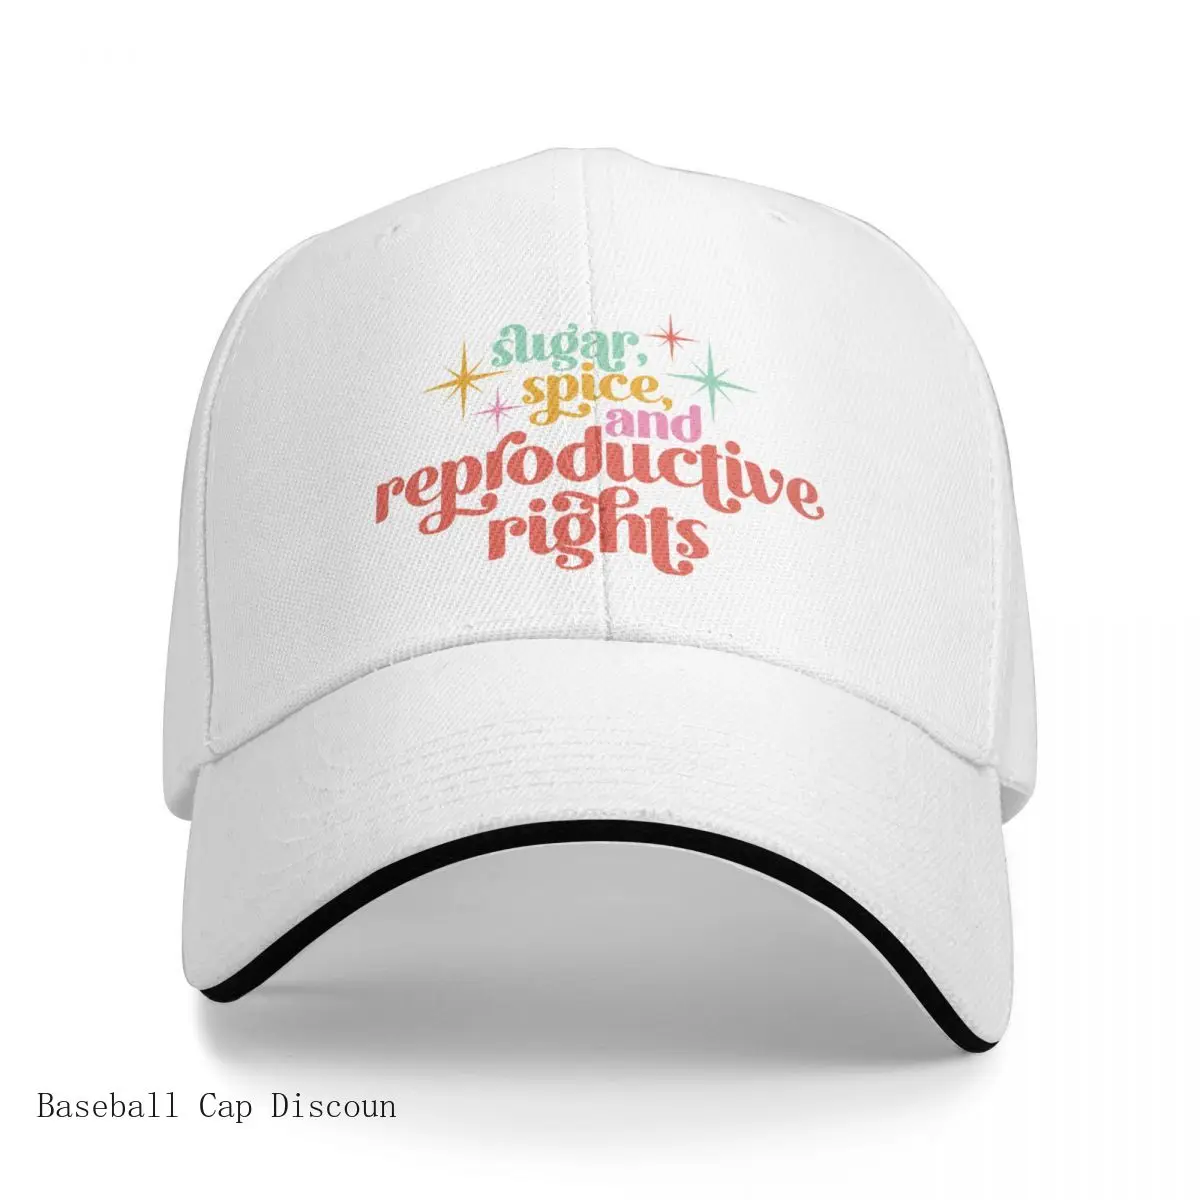 

New Sugar, Spice, And Reproductive Rights Cap Baseball Cap Snapback Cap New In The Hat New In Hat Women's Hats For The Sun Men's